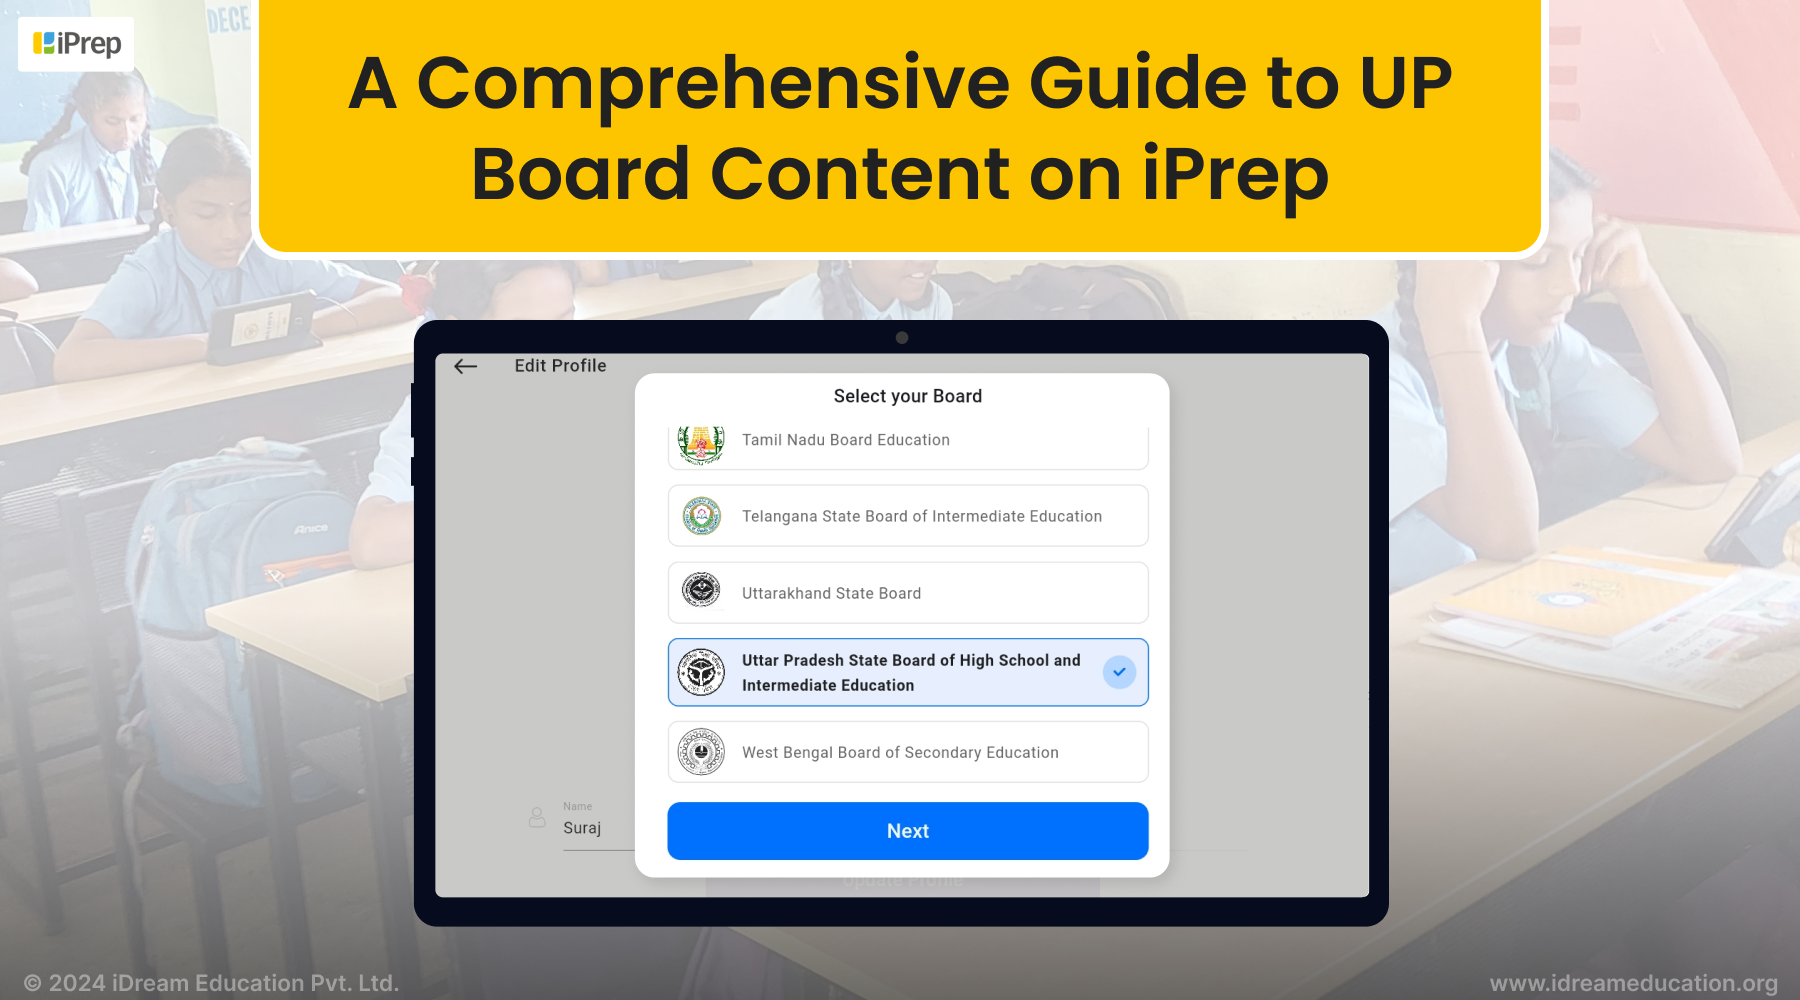 A Comprehensive Guide to UP Board Content on iPrep by iDream Education